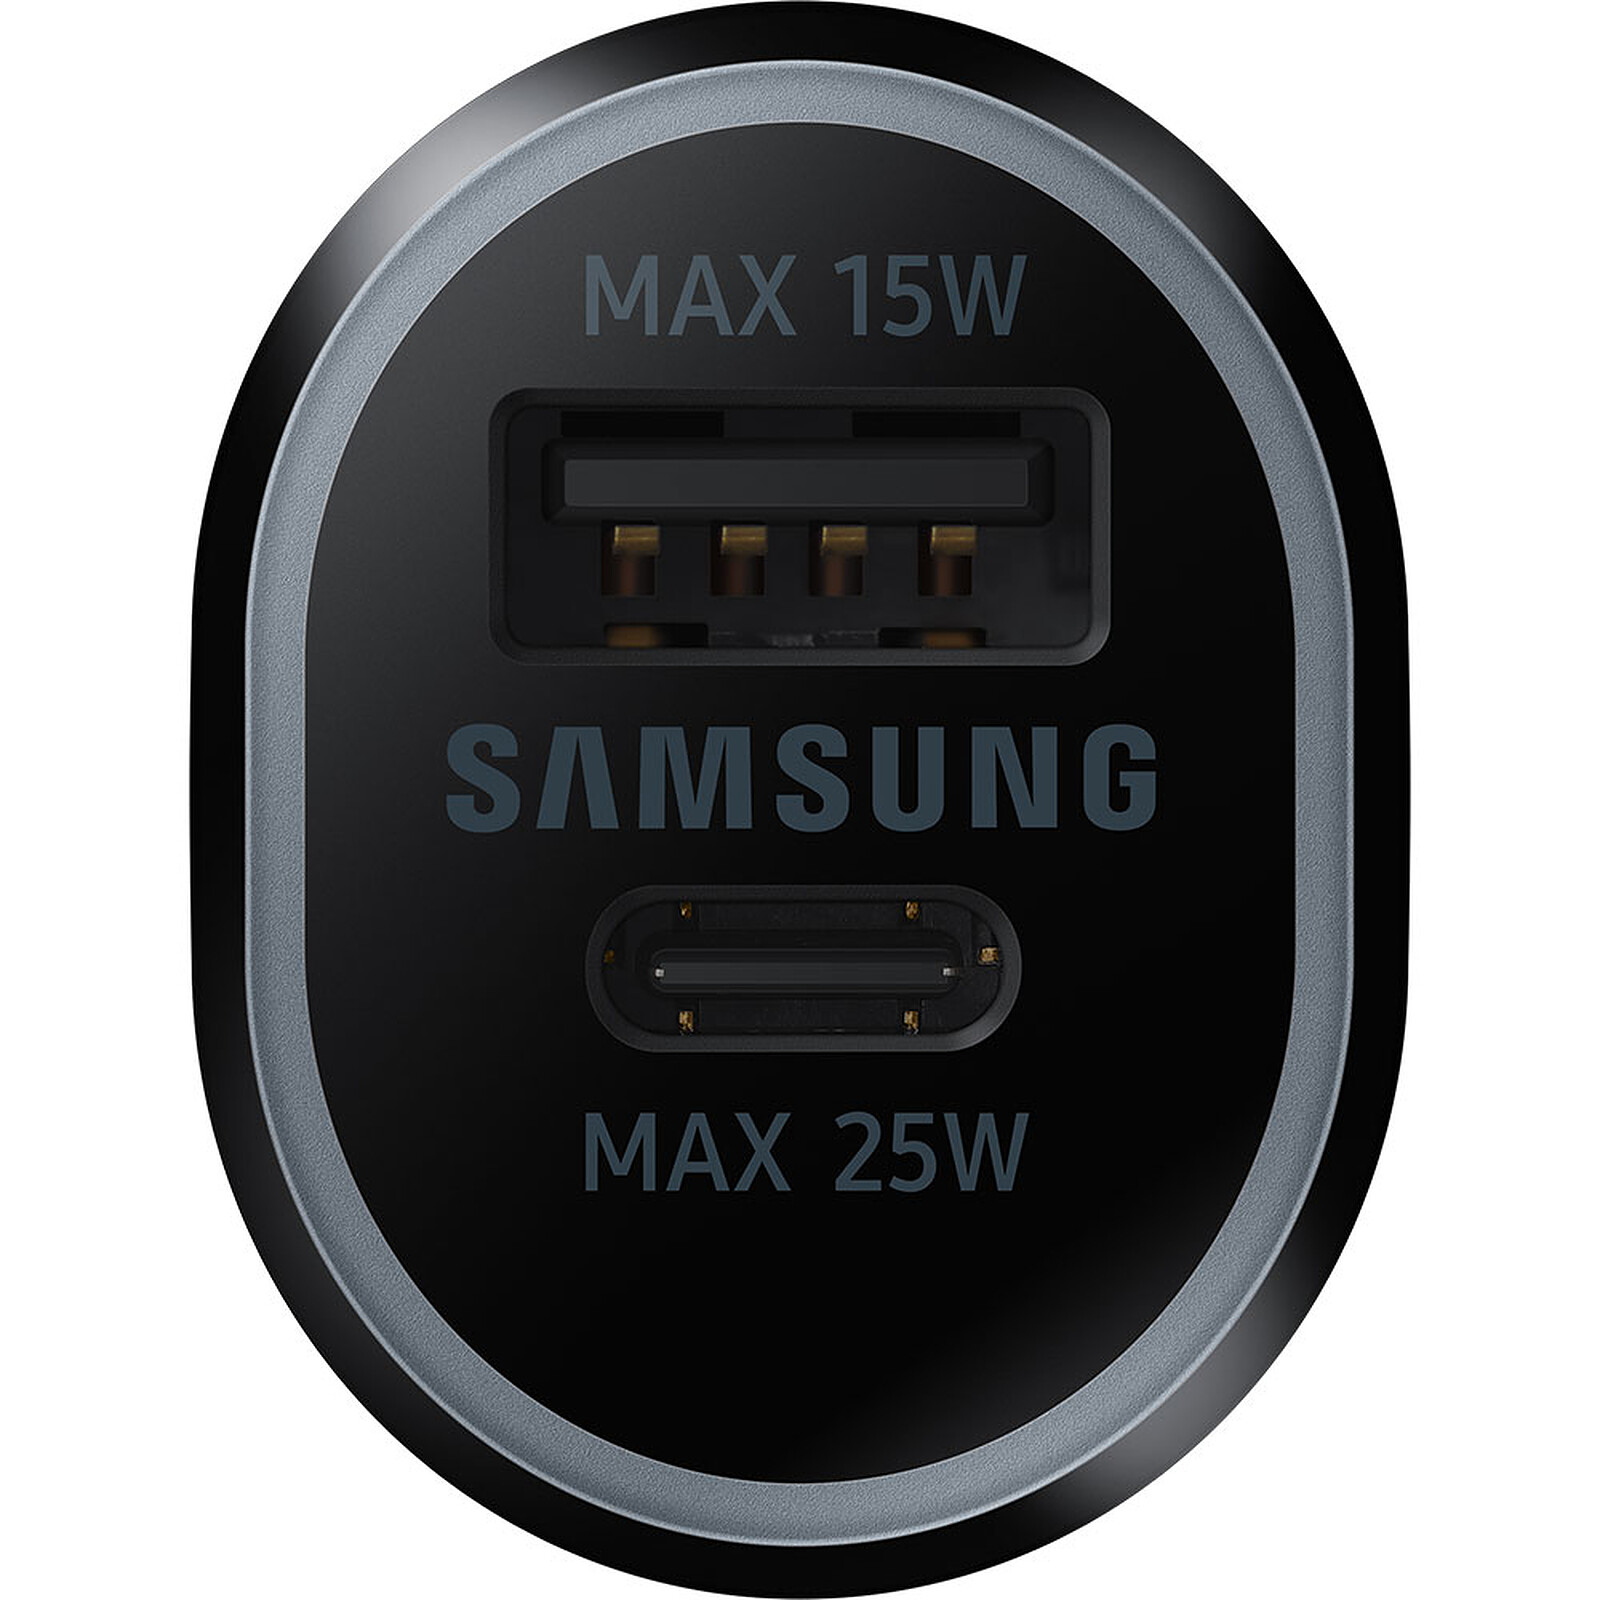 Samsung Chargeur Allume Cigare Fast Charge 40W - Chargeur allume